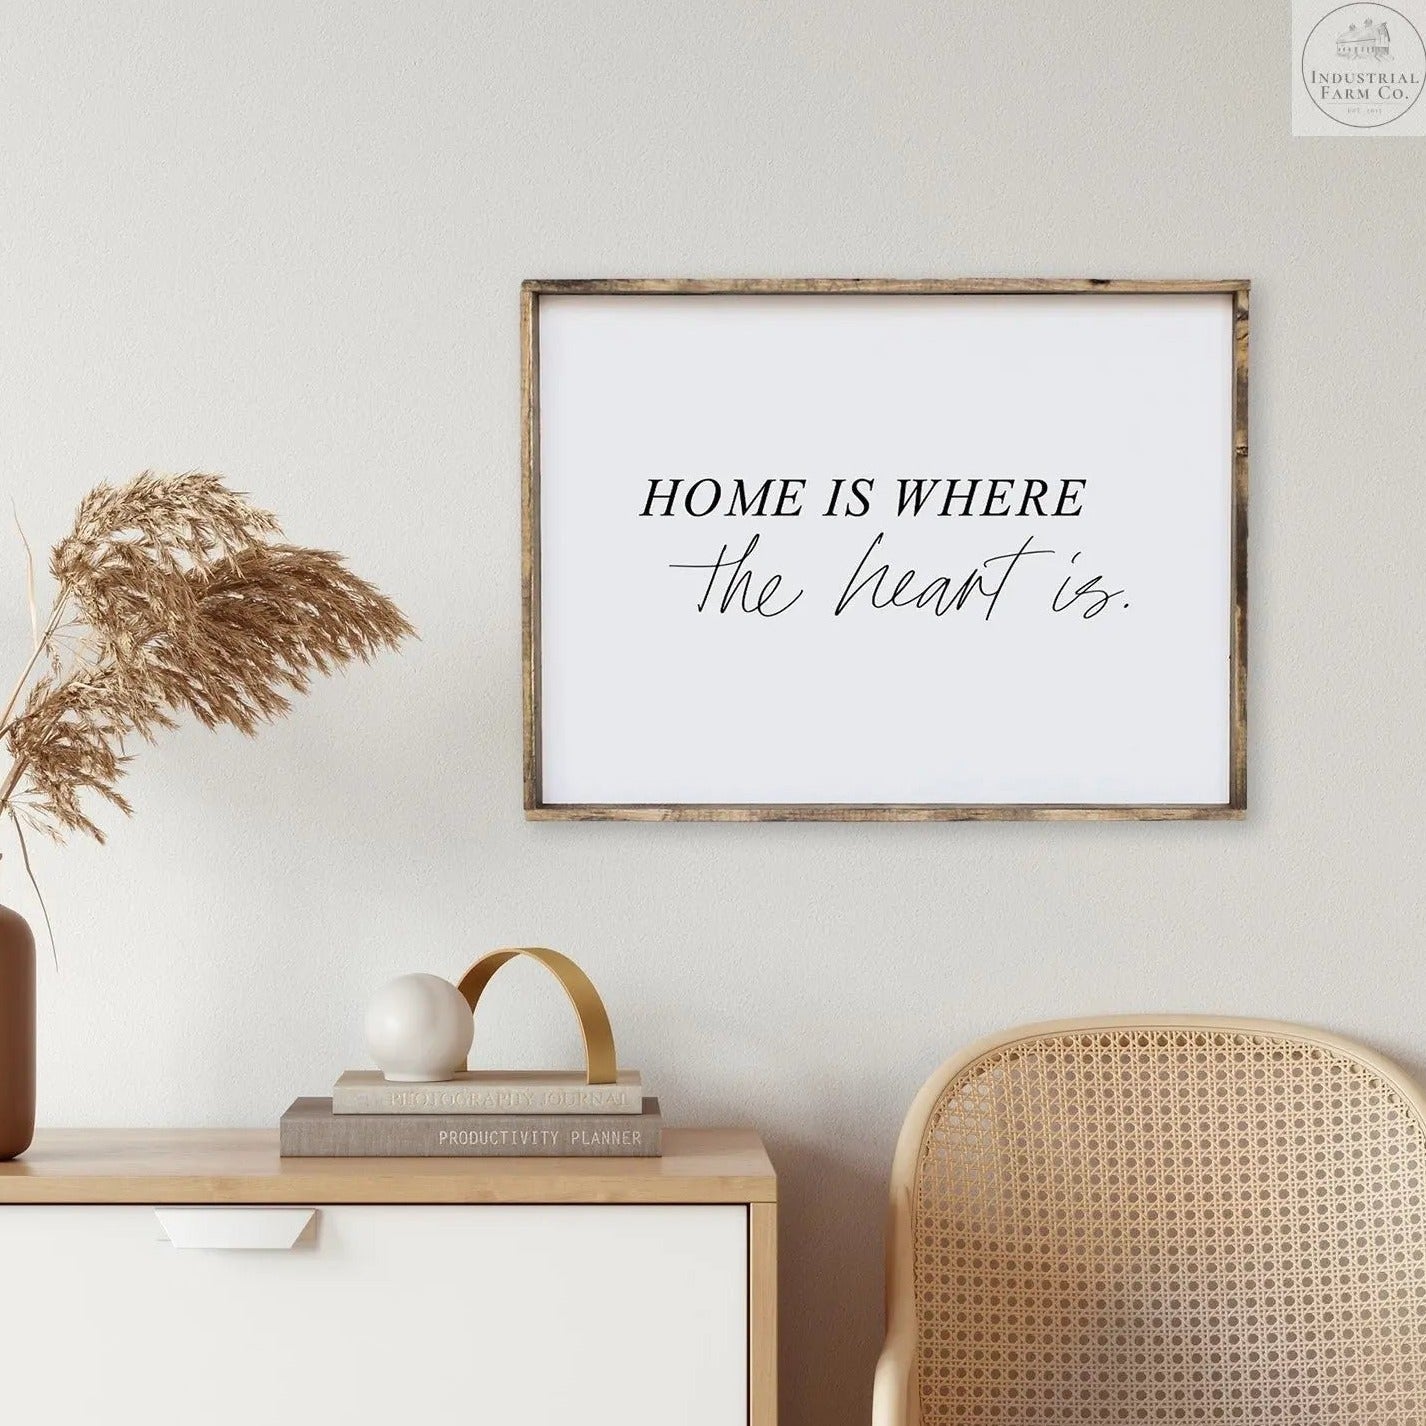 "Home is Where The Heart Is" Wood Sign Hanging Wall Art Default Title   | Industrial Farm Co